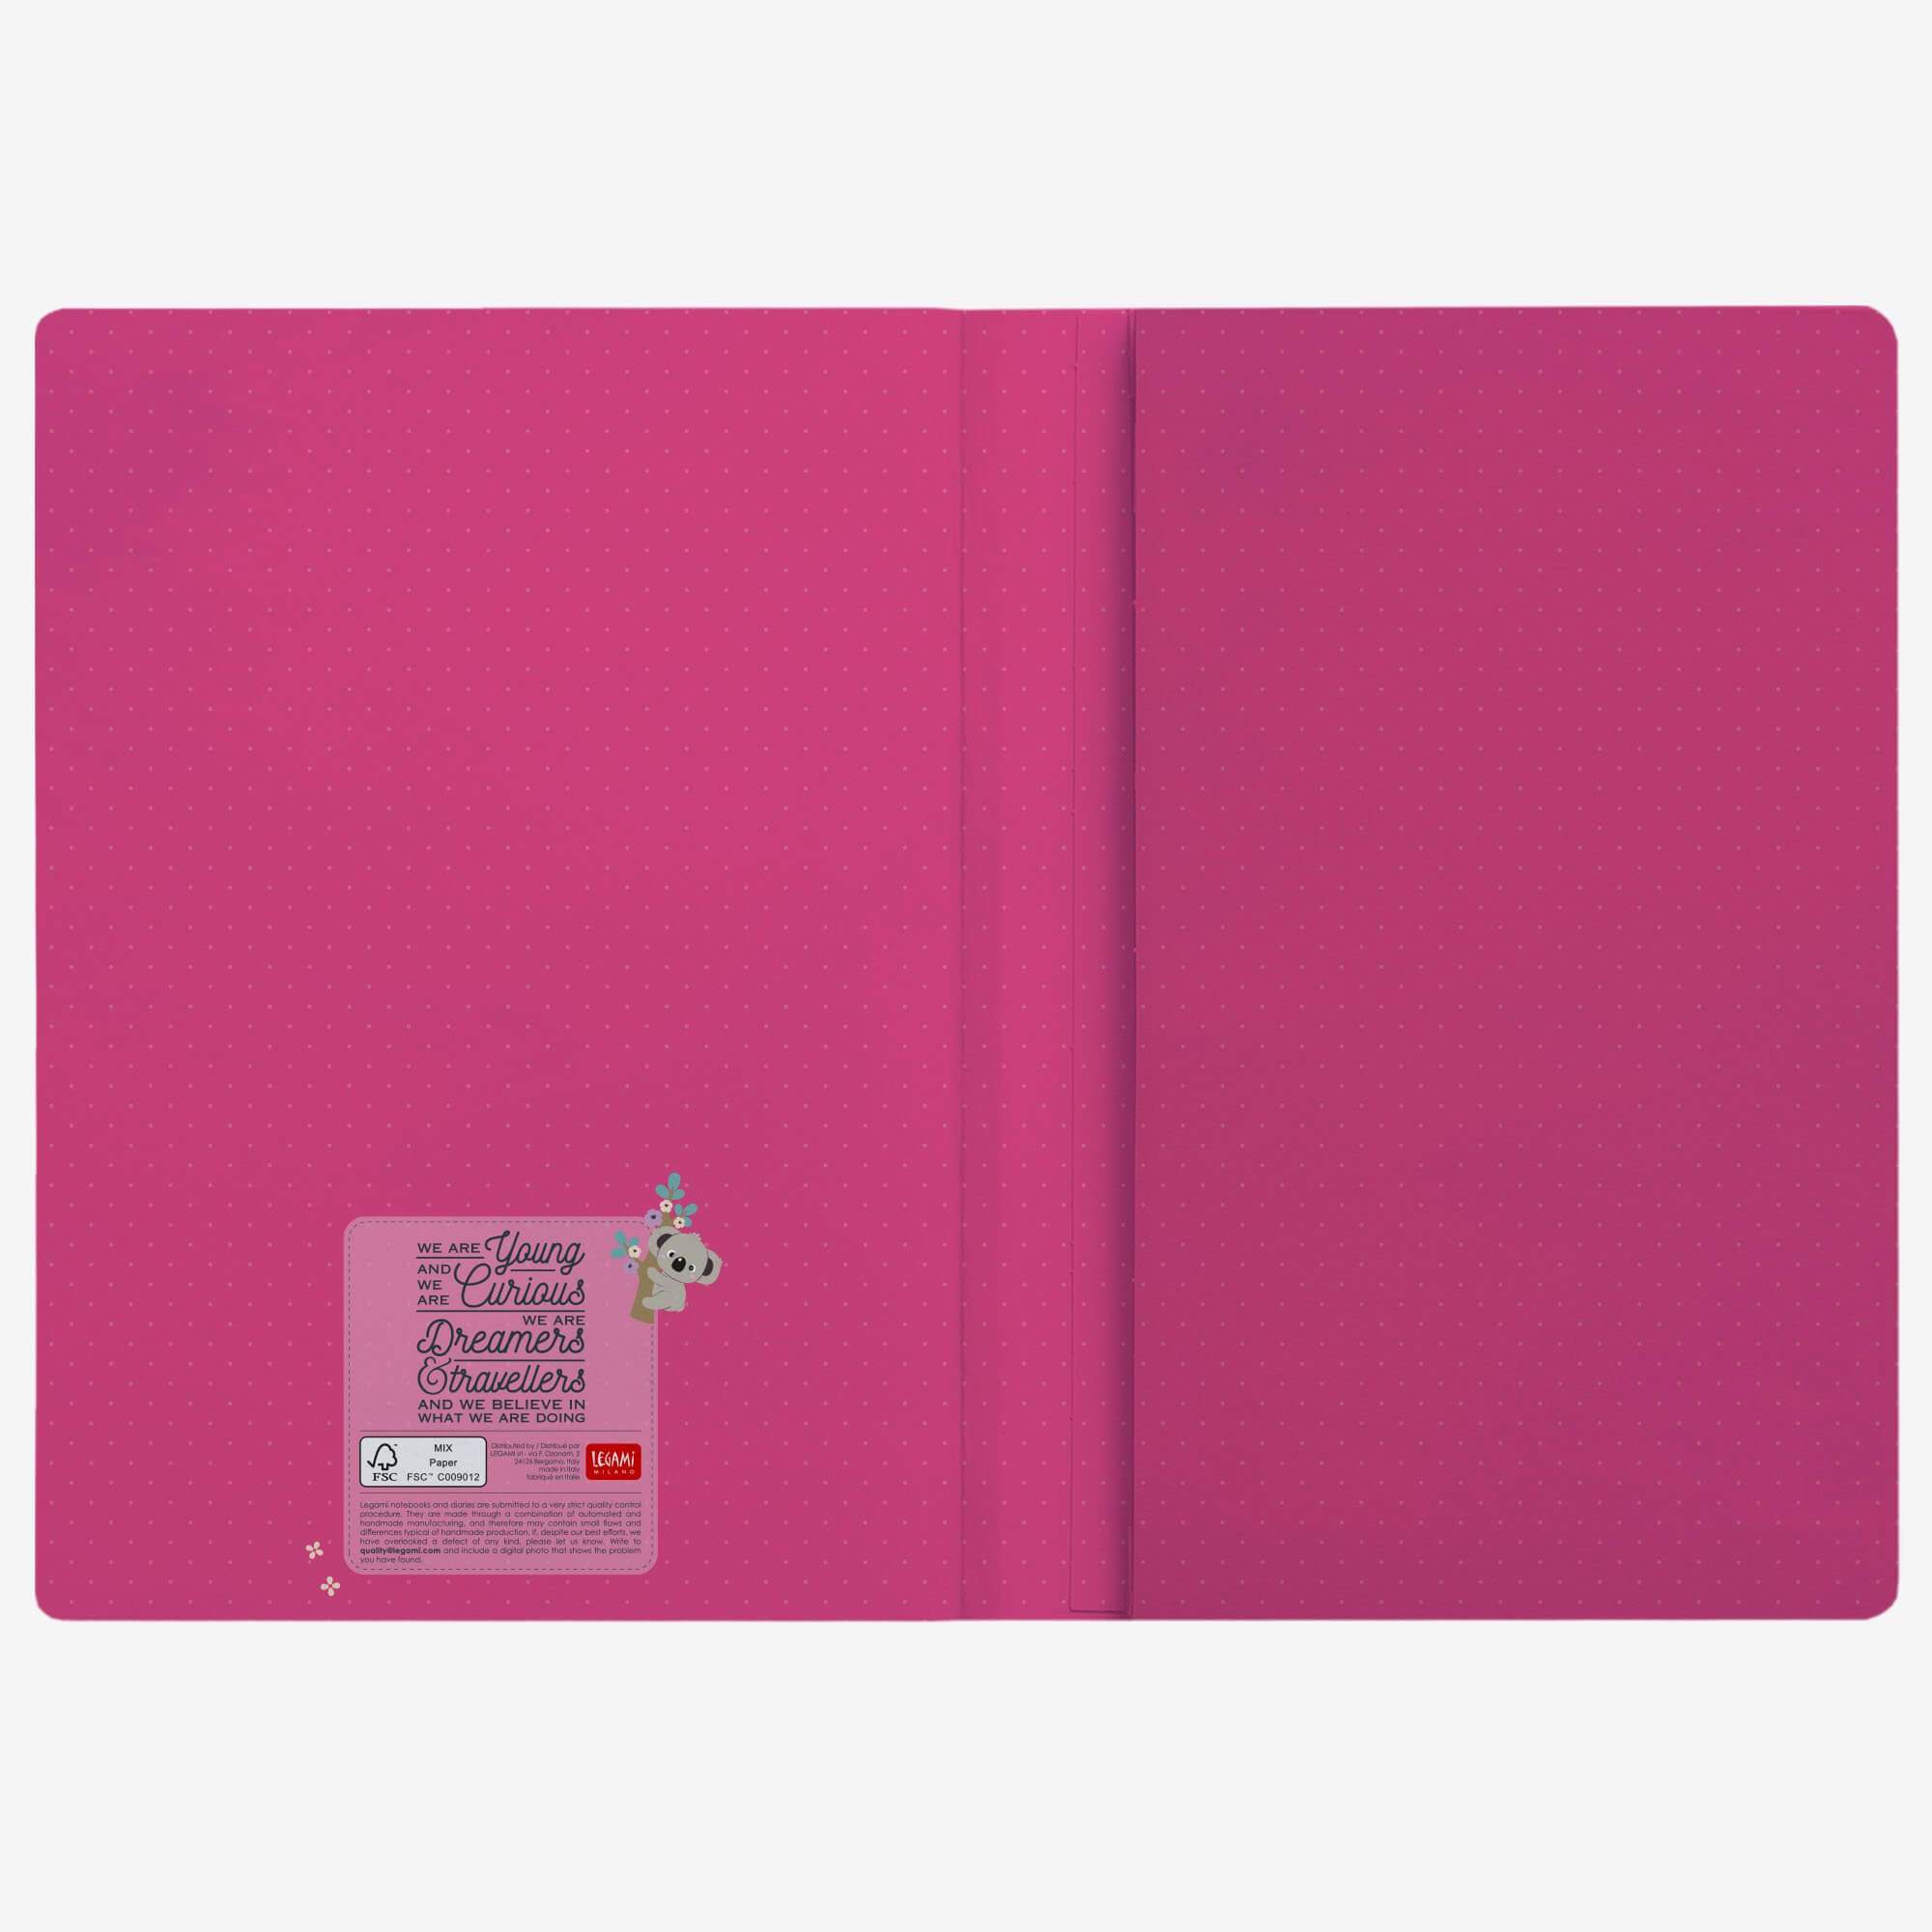 Notebook L Koality Hugs - Carnet 160 pages Legami 